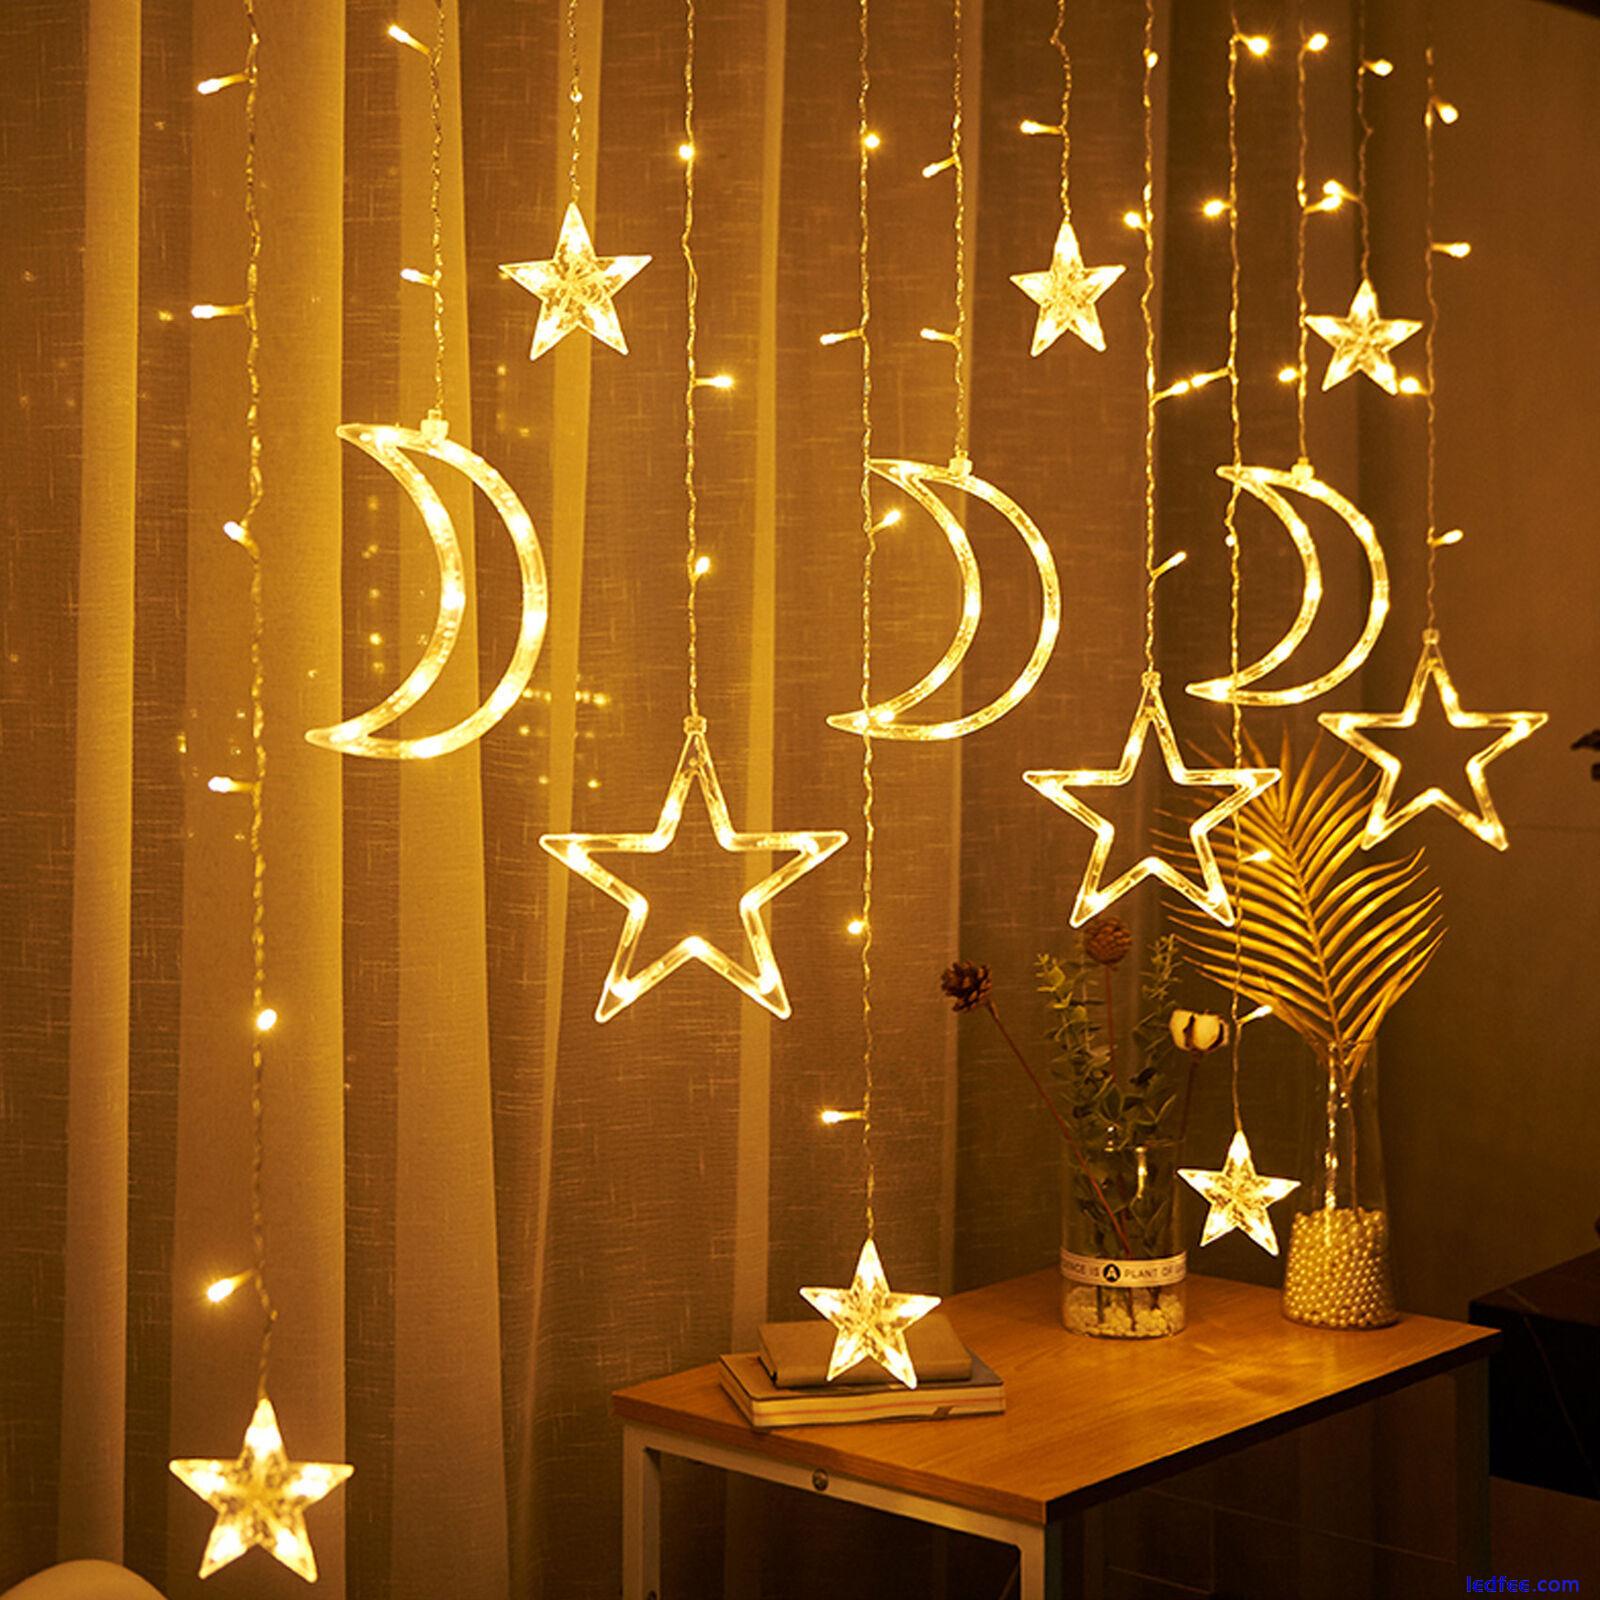 Twinkling Moon Star String Lamp LED Curtain Fairy Light Party Home Decor Plug In 4 